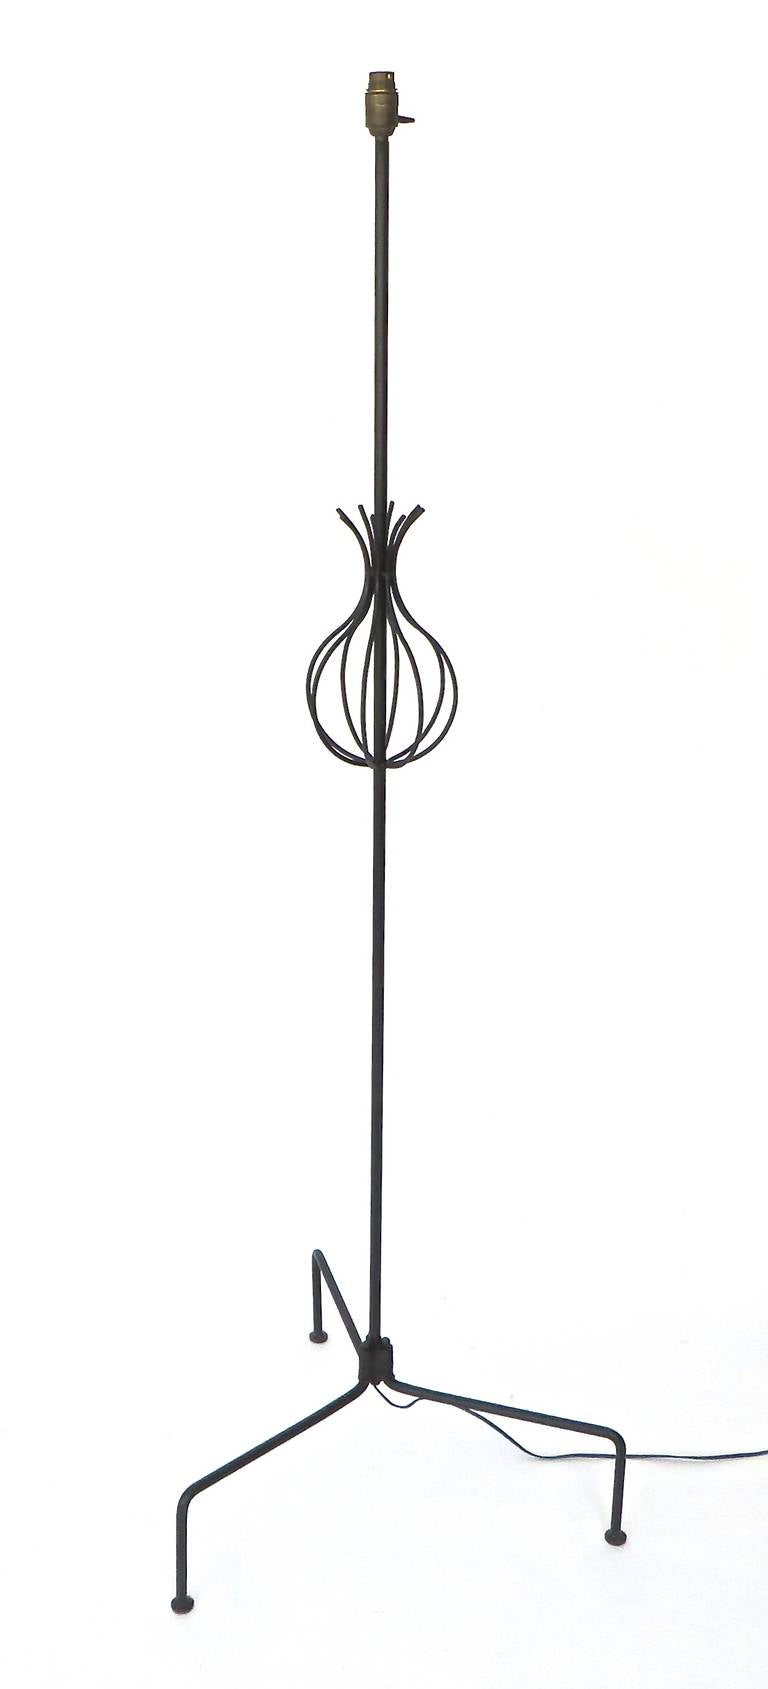 Interesting French floor lamp in black wrought iron with a pineapple or basket motif in the central portion on splayed legs. Very architectural. 
Attributed to Rene Jean Caillette, circa 1950
64